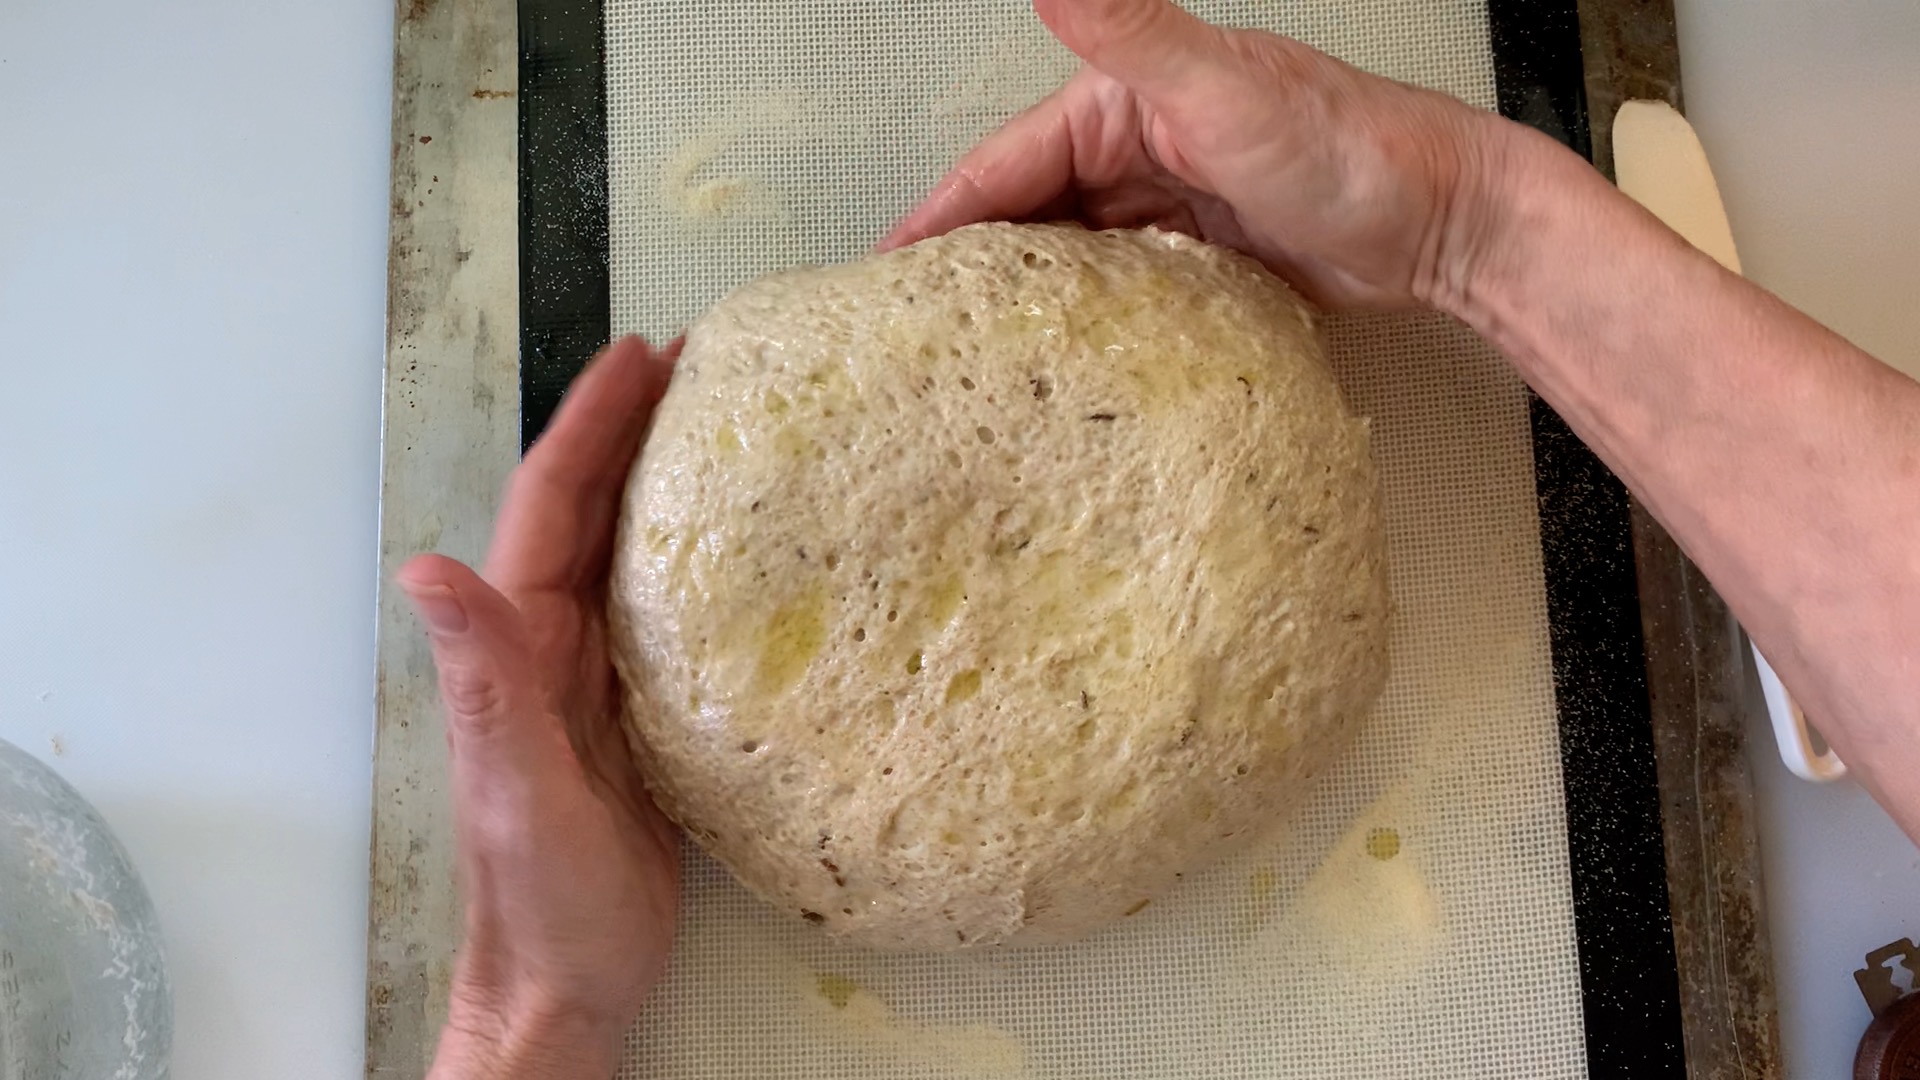 pushing dough toward the middle with hands to cause the loaf to be taller.